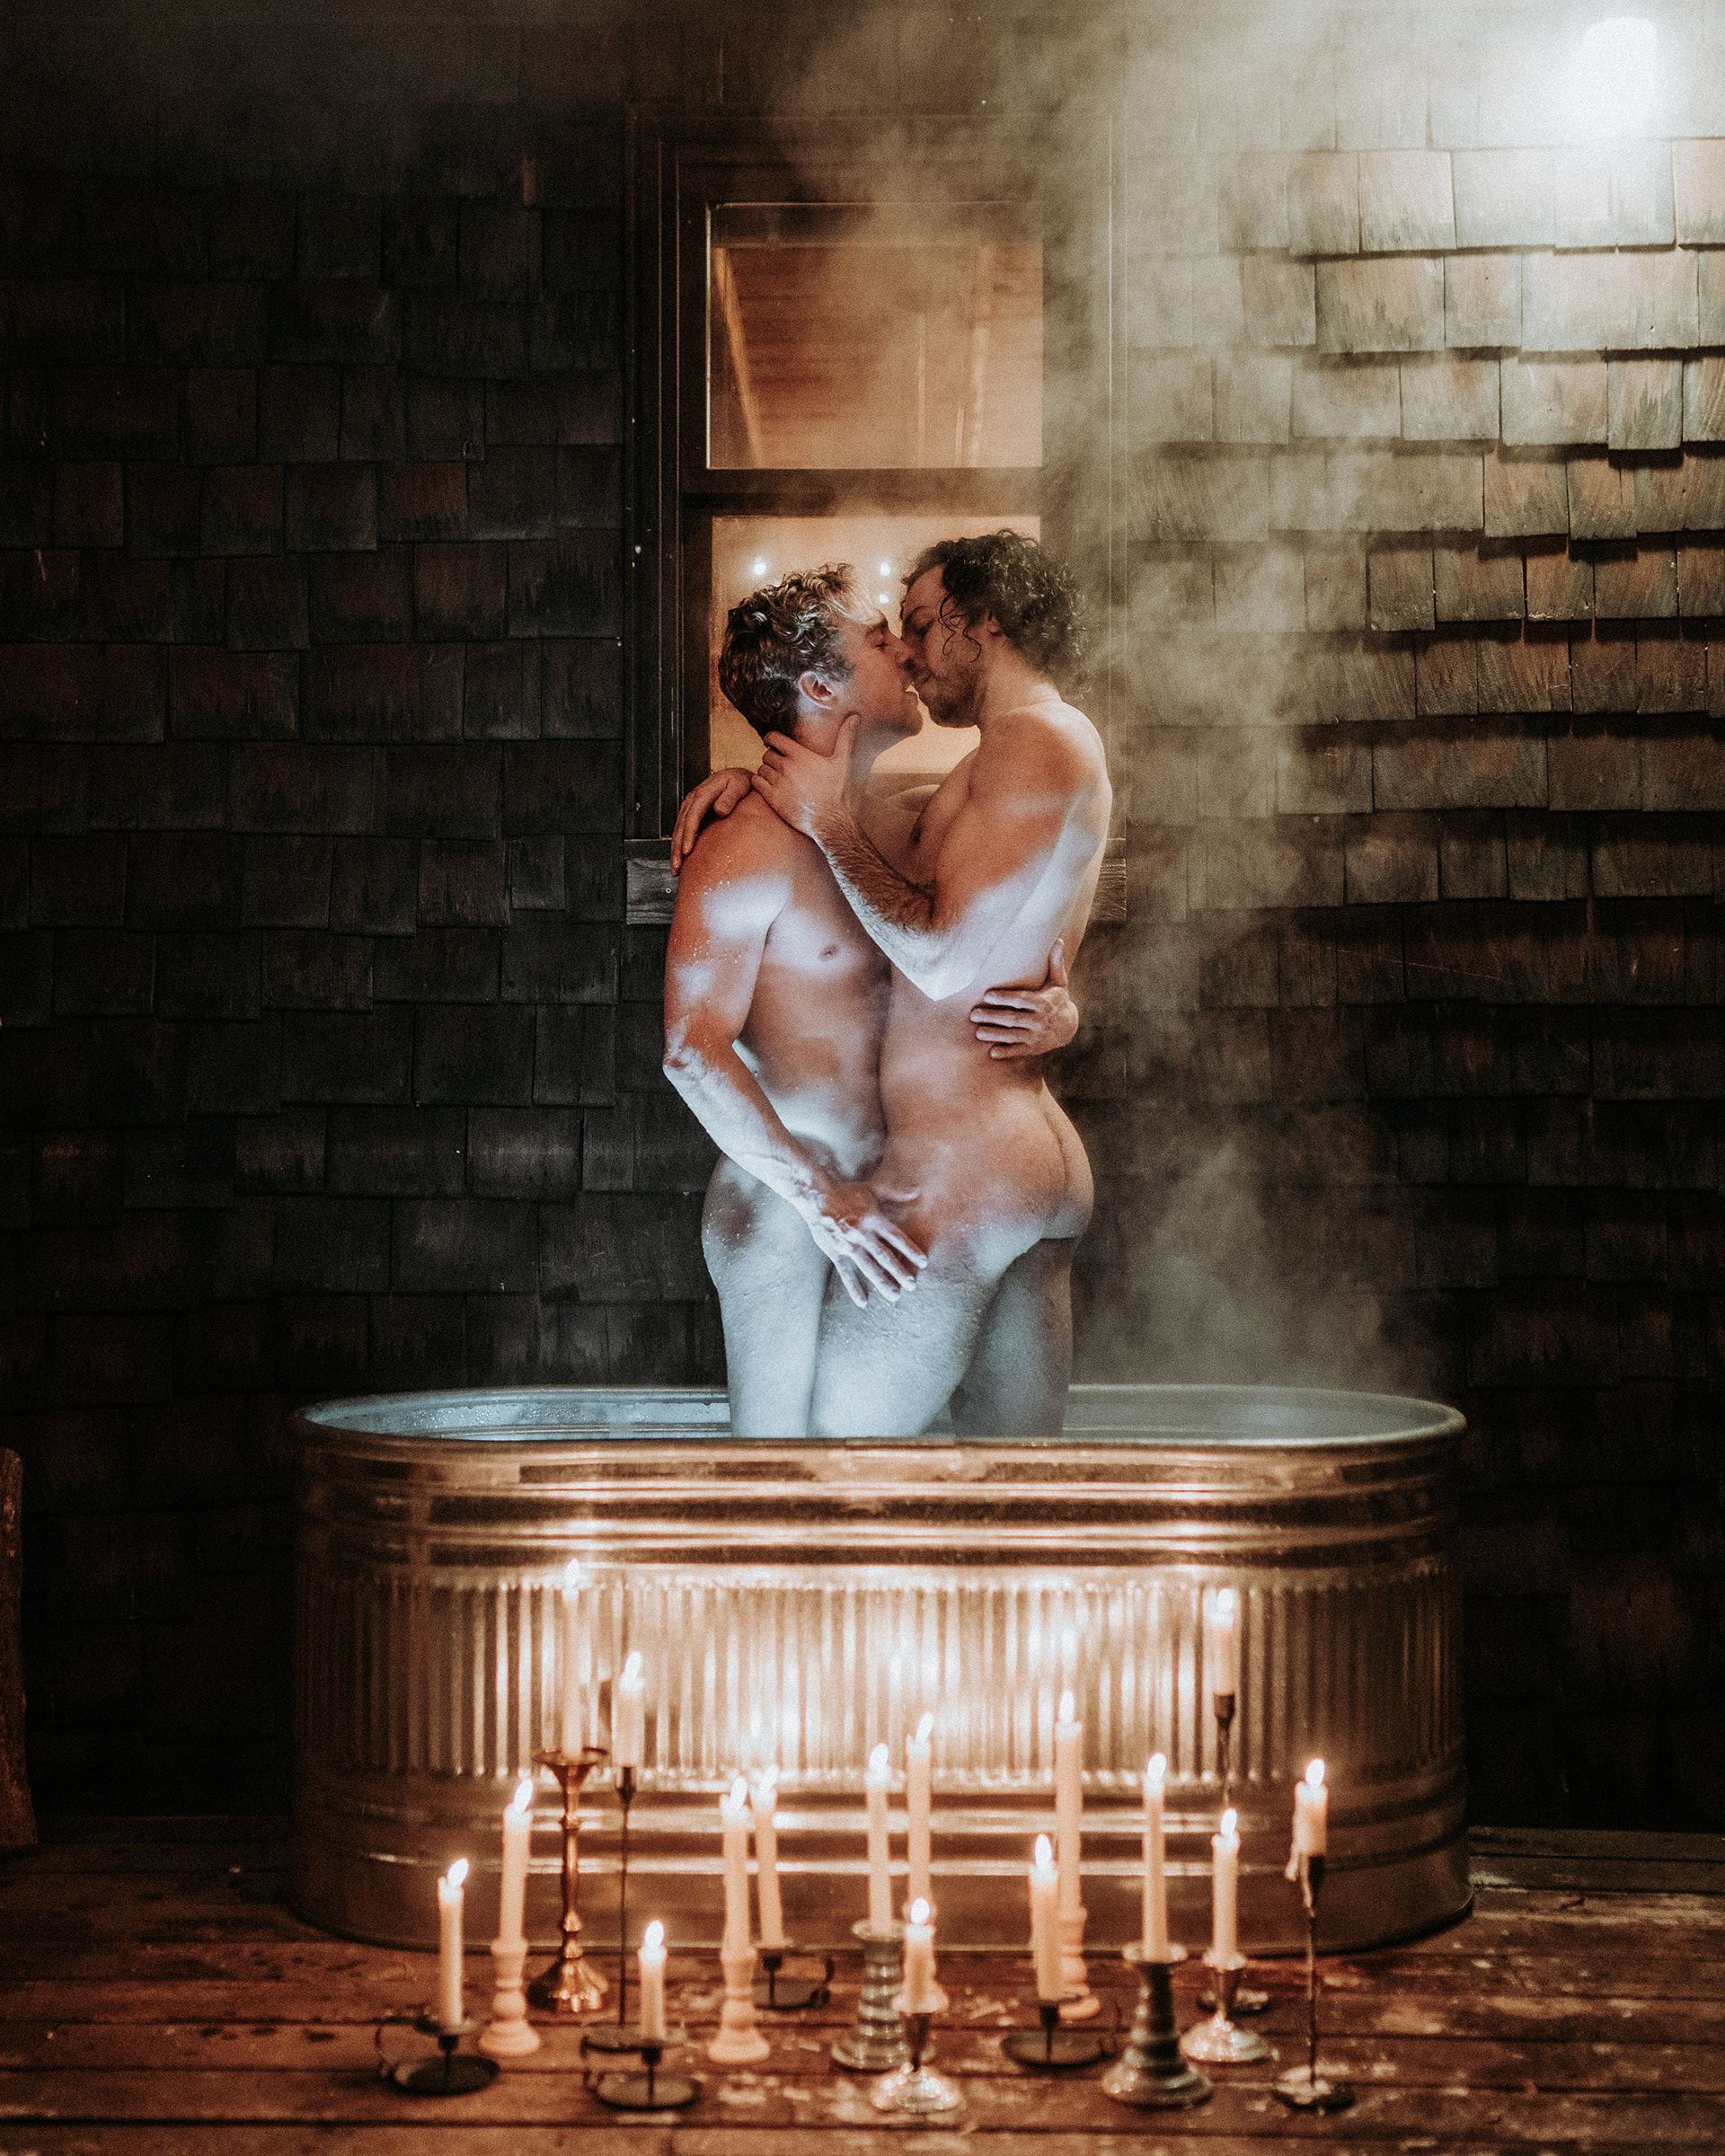 Two gay men kissing in a hot tub surrounded by candles.